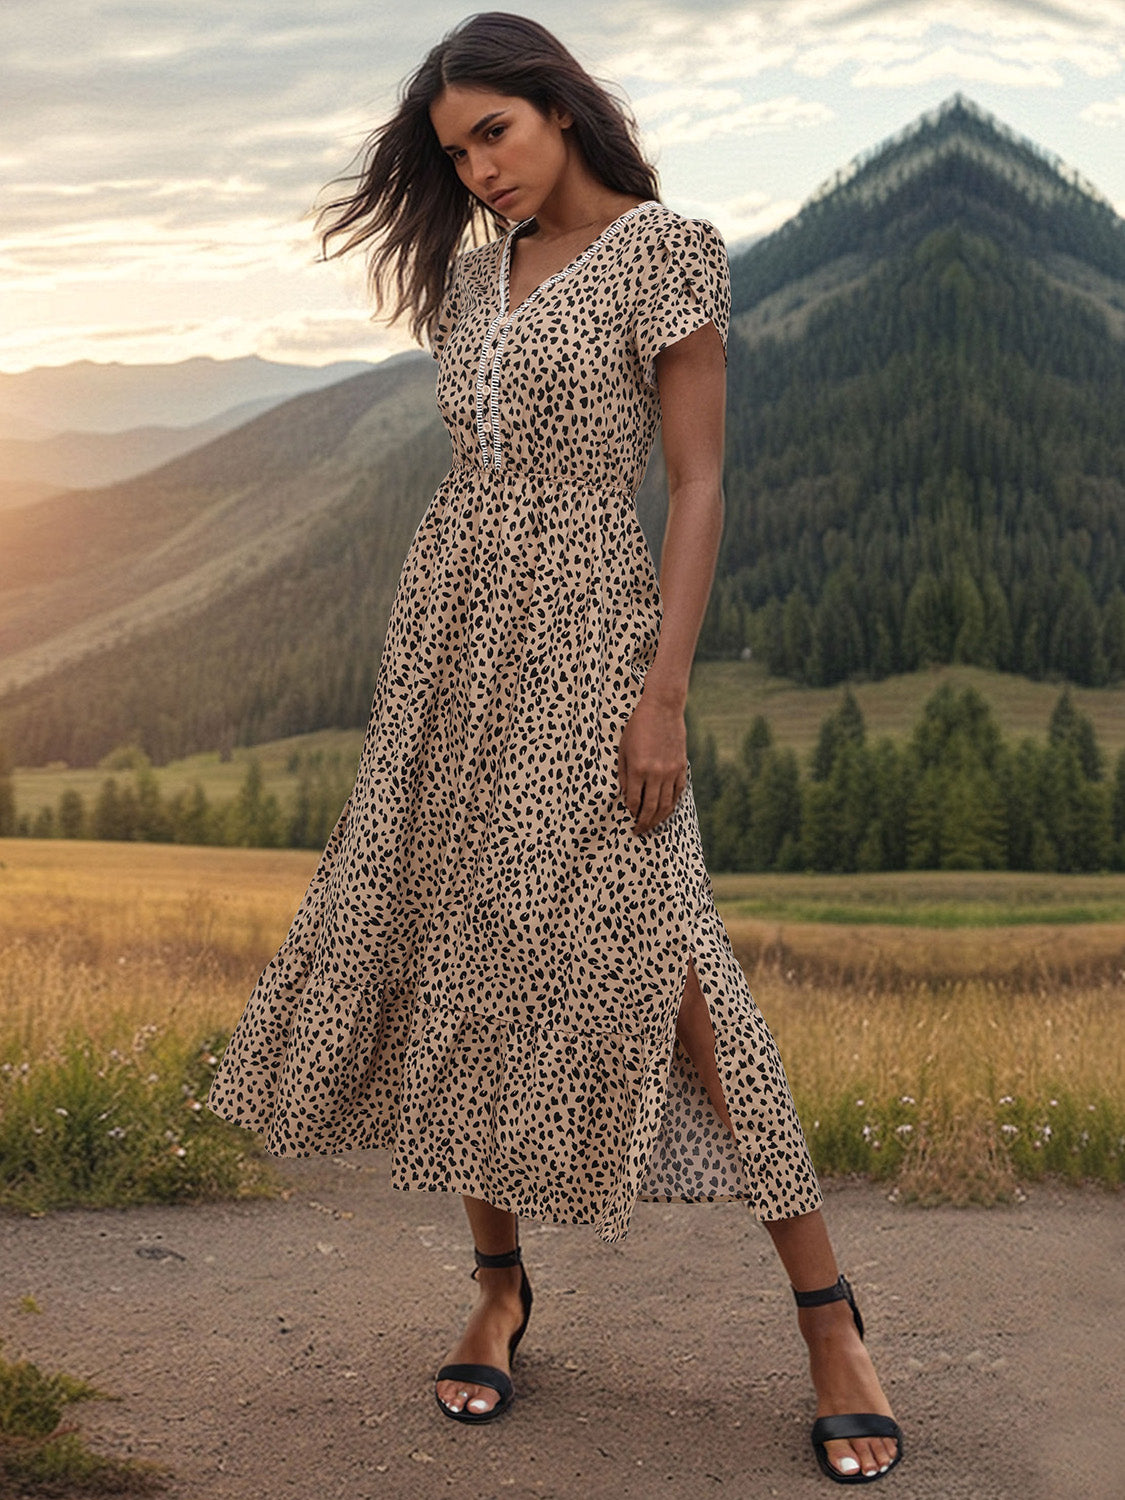 Chic V-Neck Dress with a playful print, elegant slit, and comfy fit for versatile summer styling. Perfect from day to night.